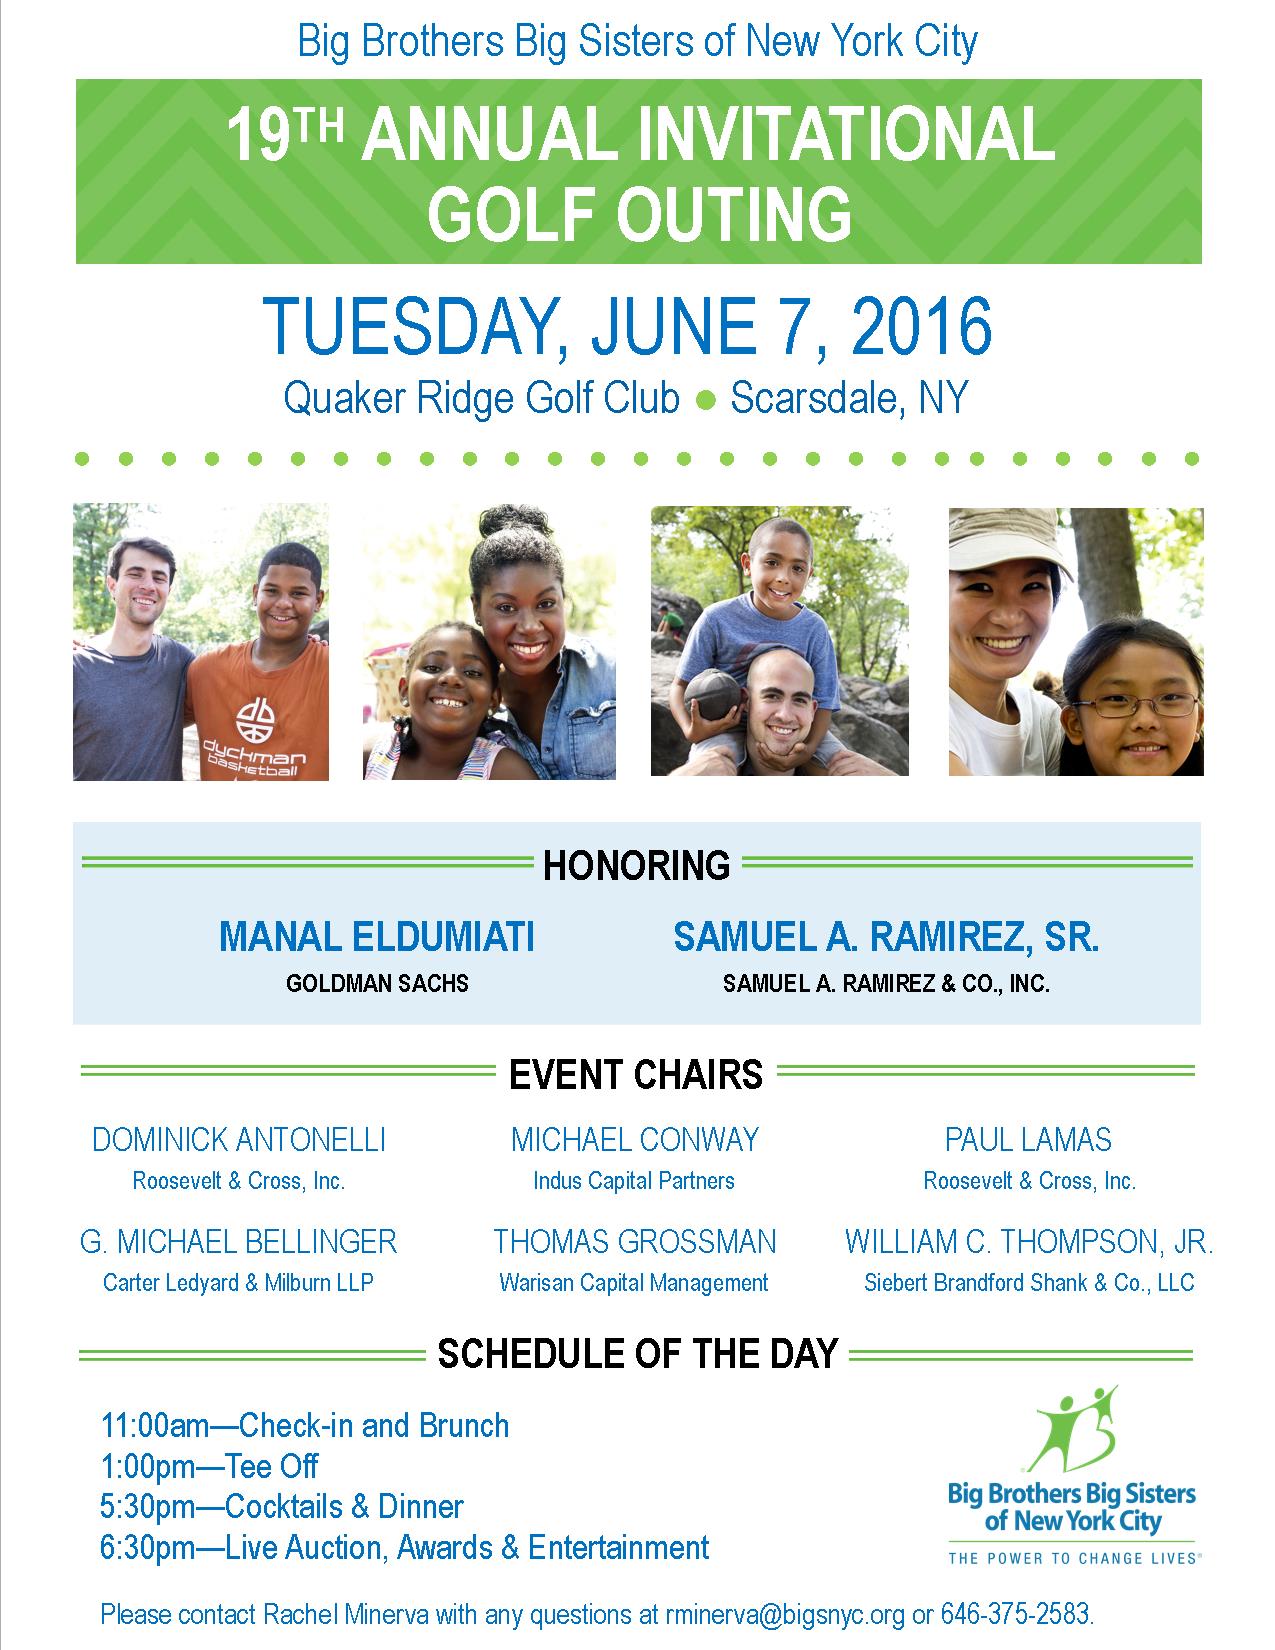 2016 BBBS of NYC Golf Outing Invitation_web.jpg